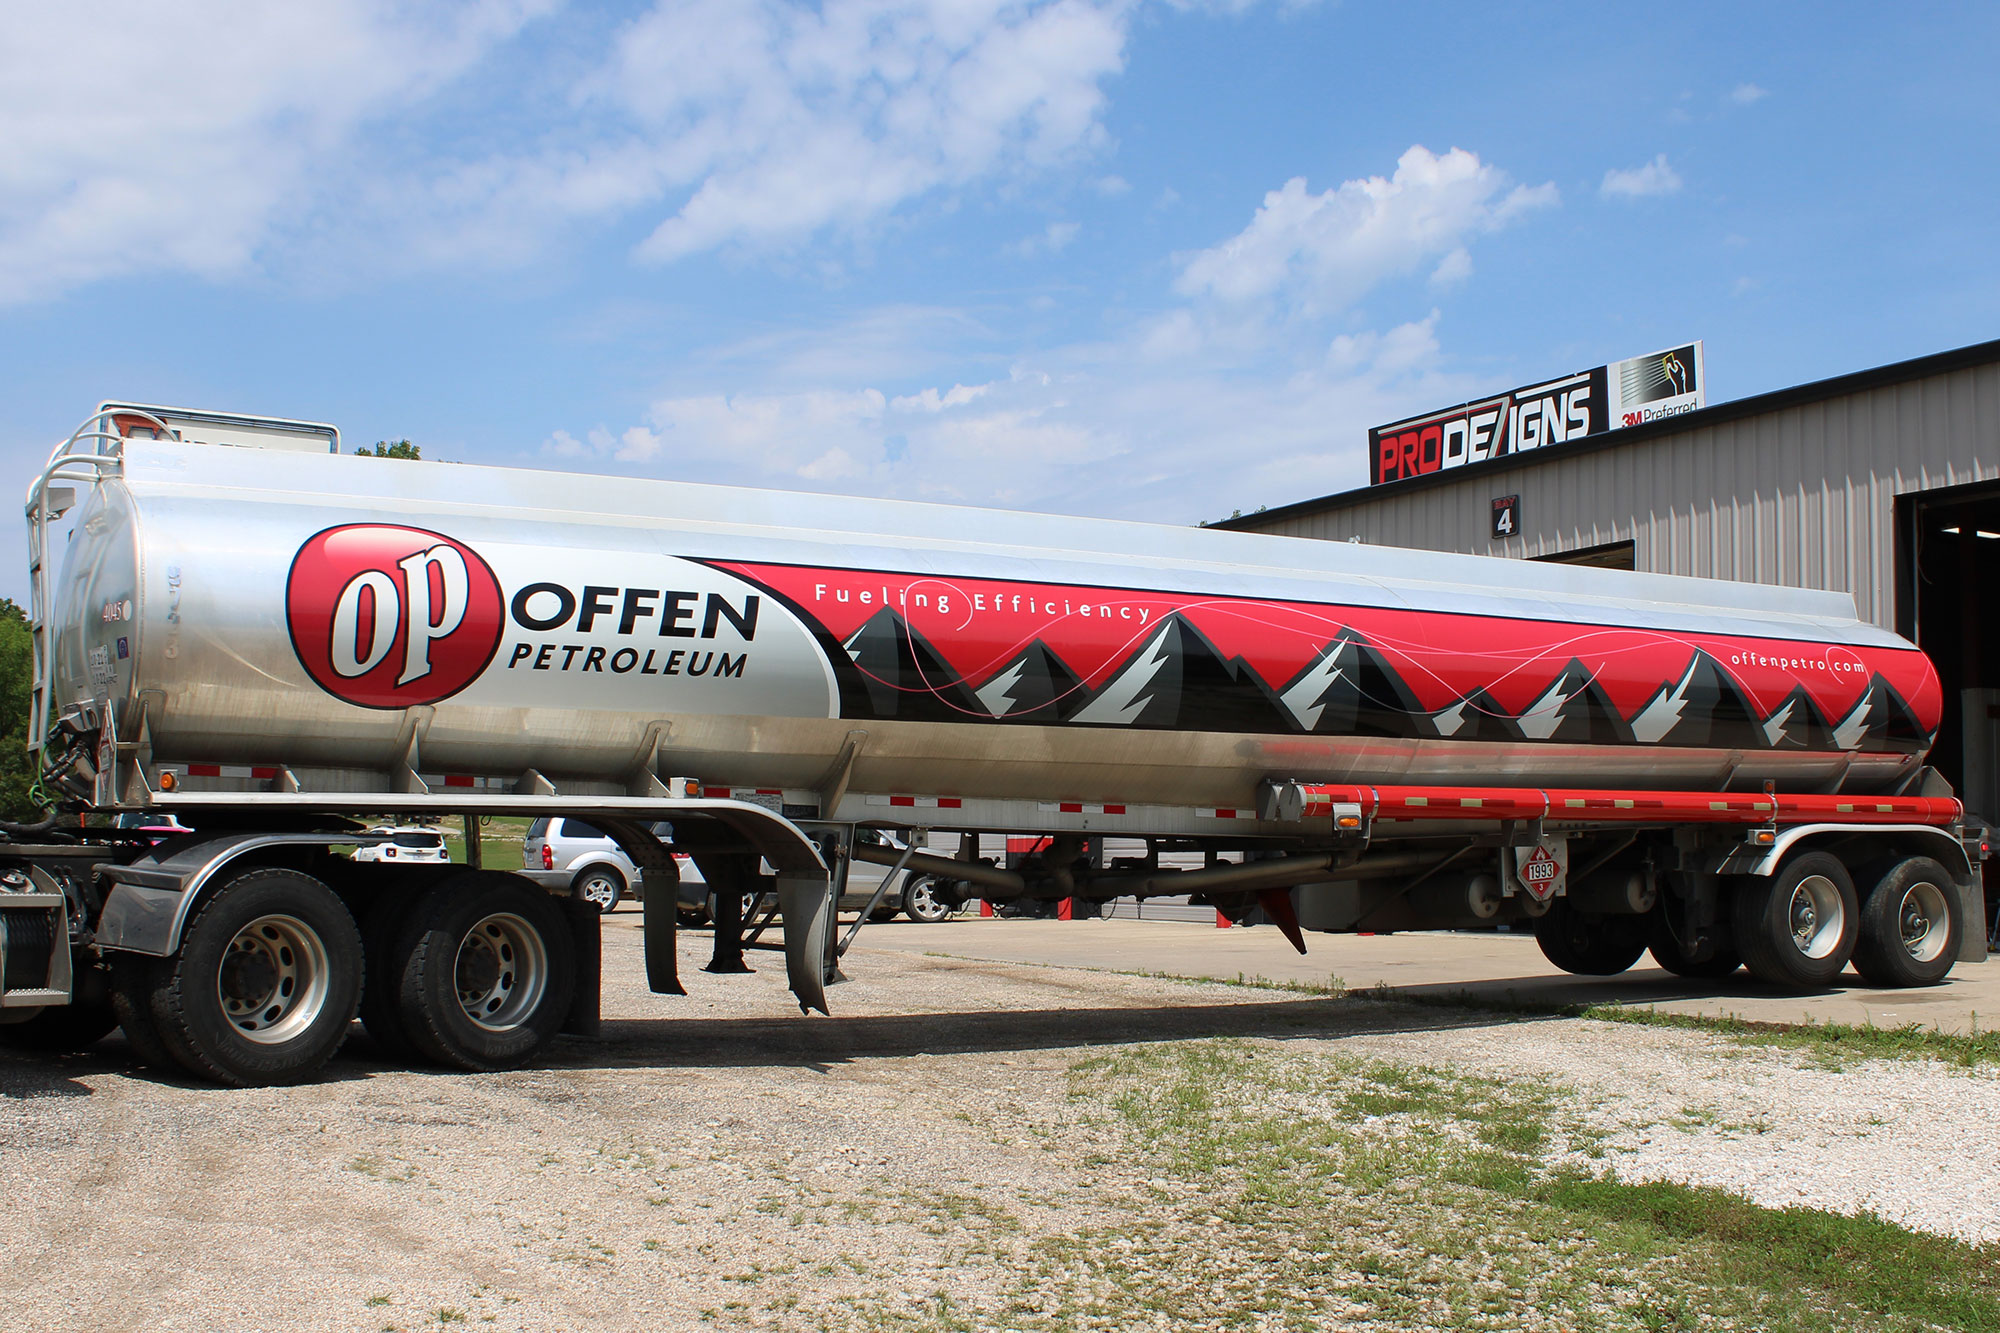 Offen Petroleum Tanker Graphics And Wraps Store Fronts Windows Outdoor Pro Dezigns Columbia Mo